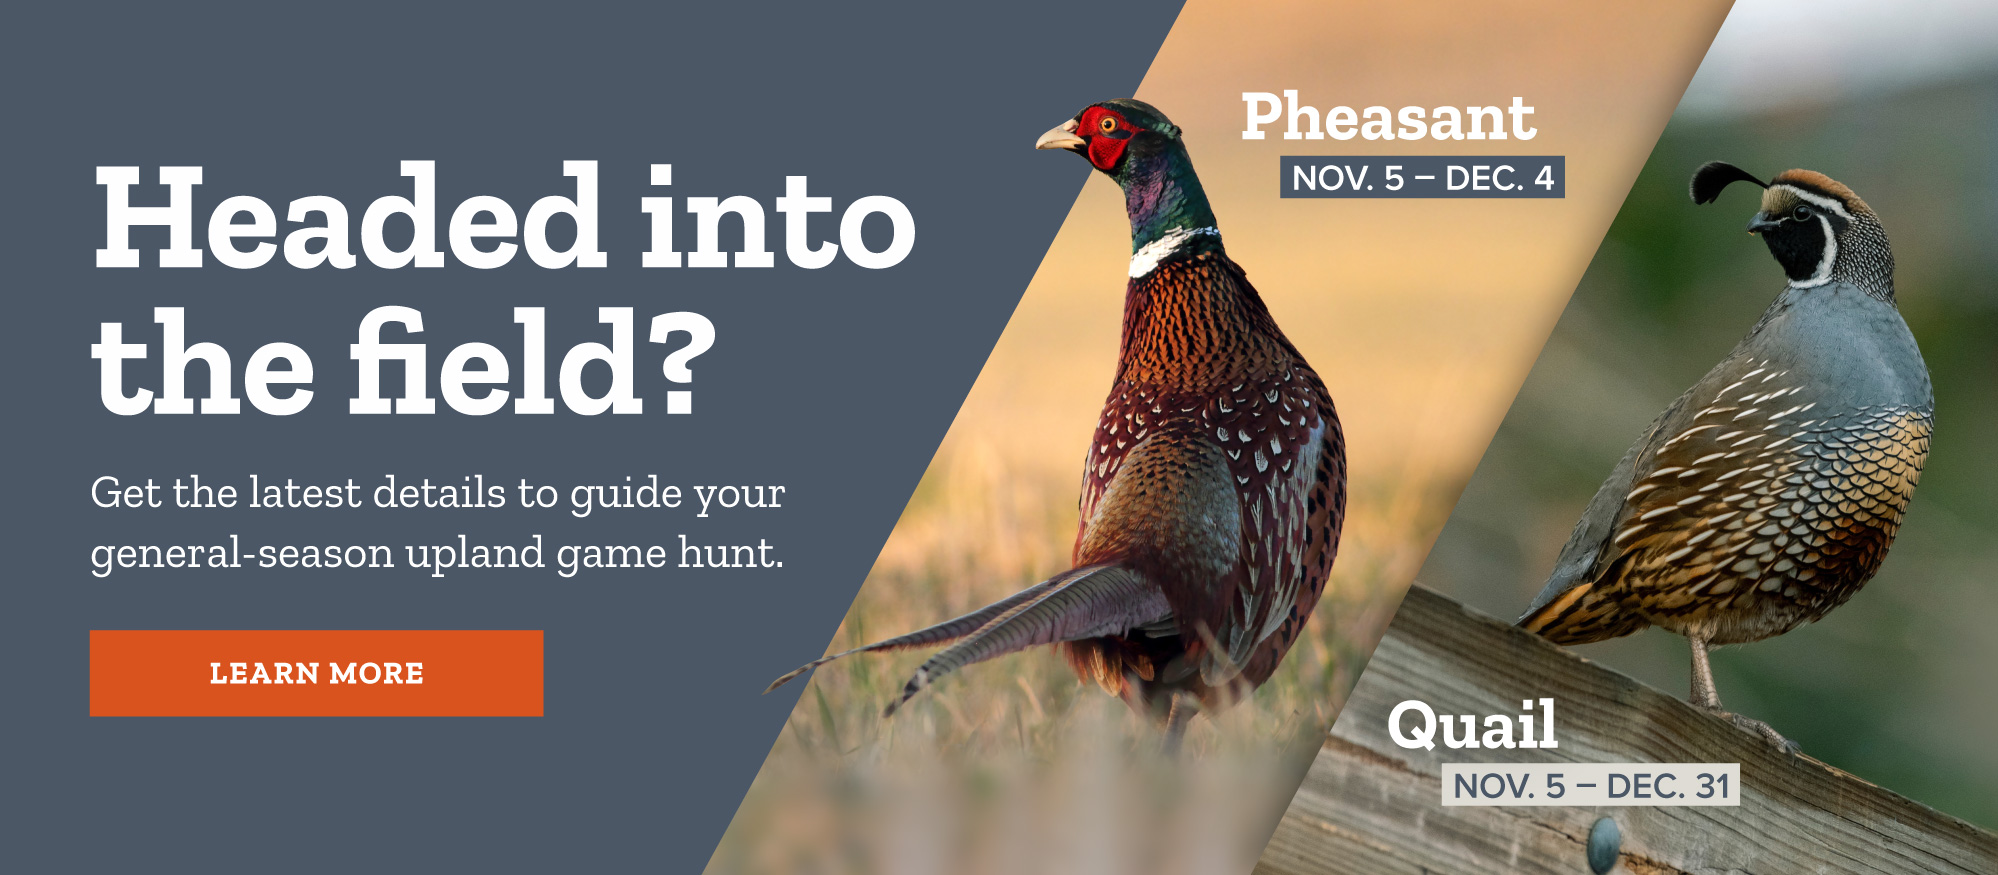 2022 pheasant and quail hunts: Get the latest details to guide your upland game hunt.